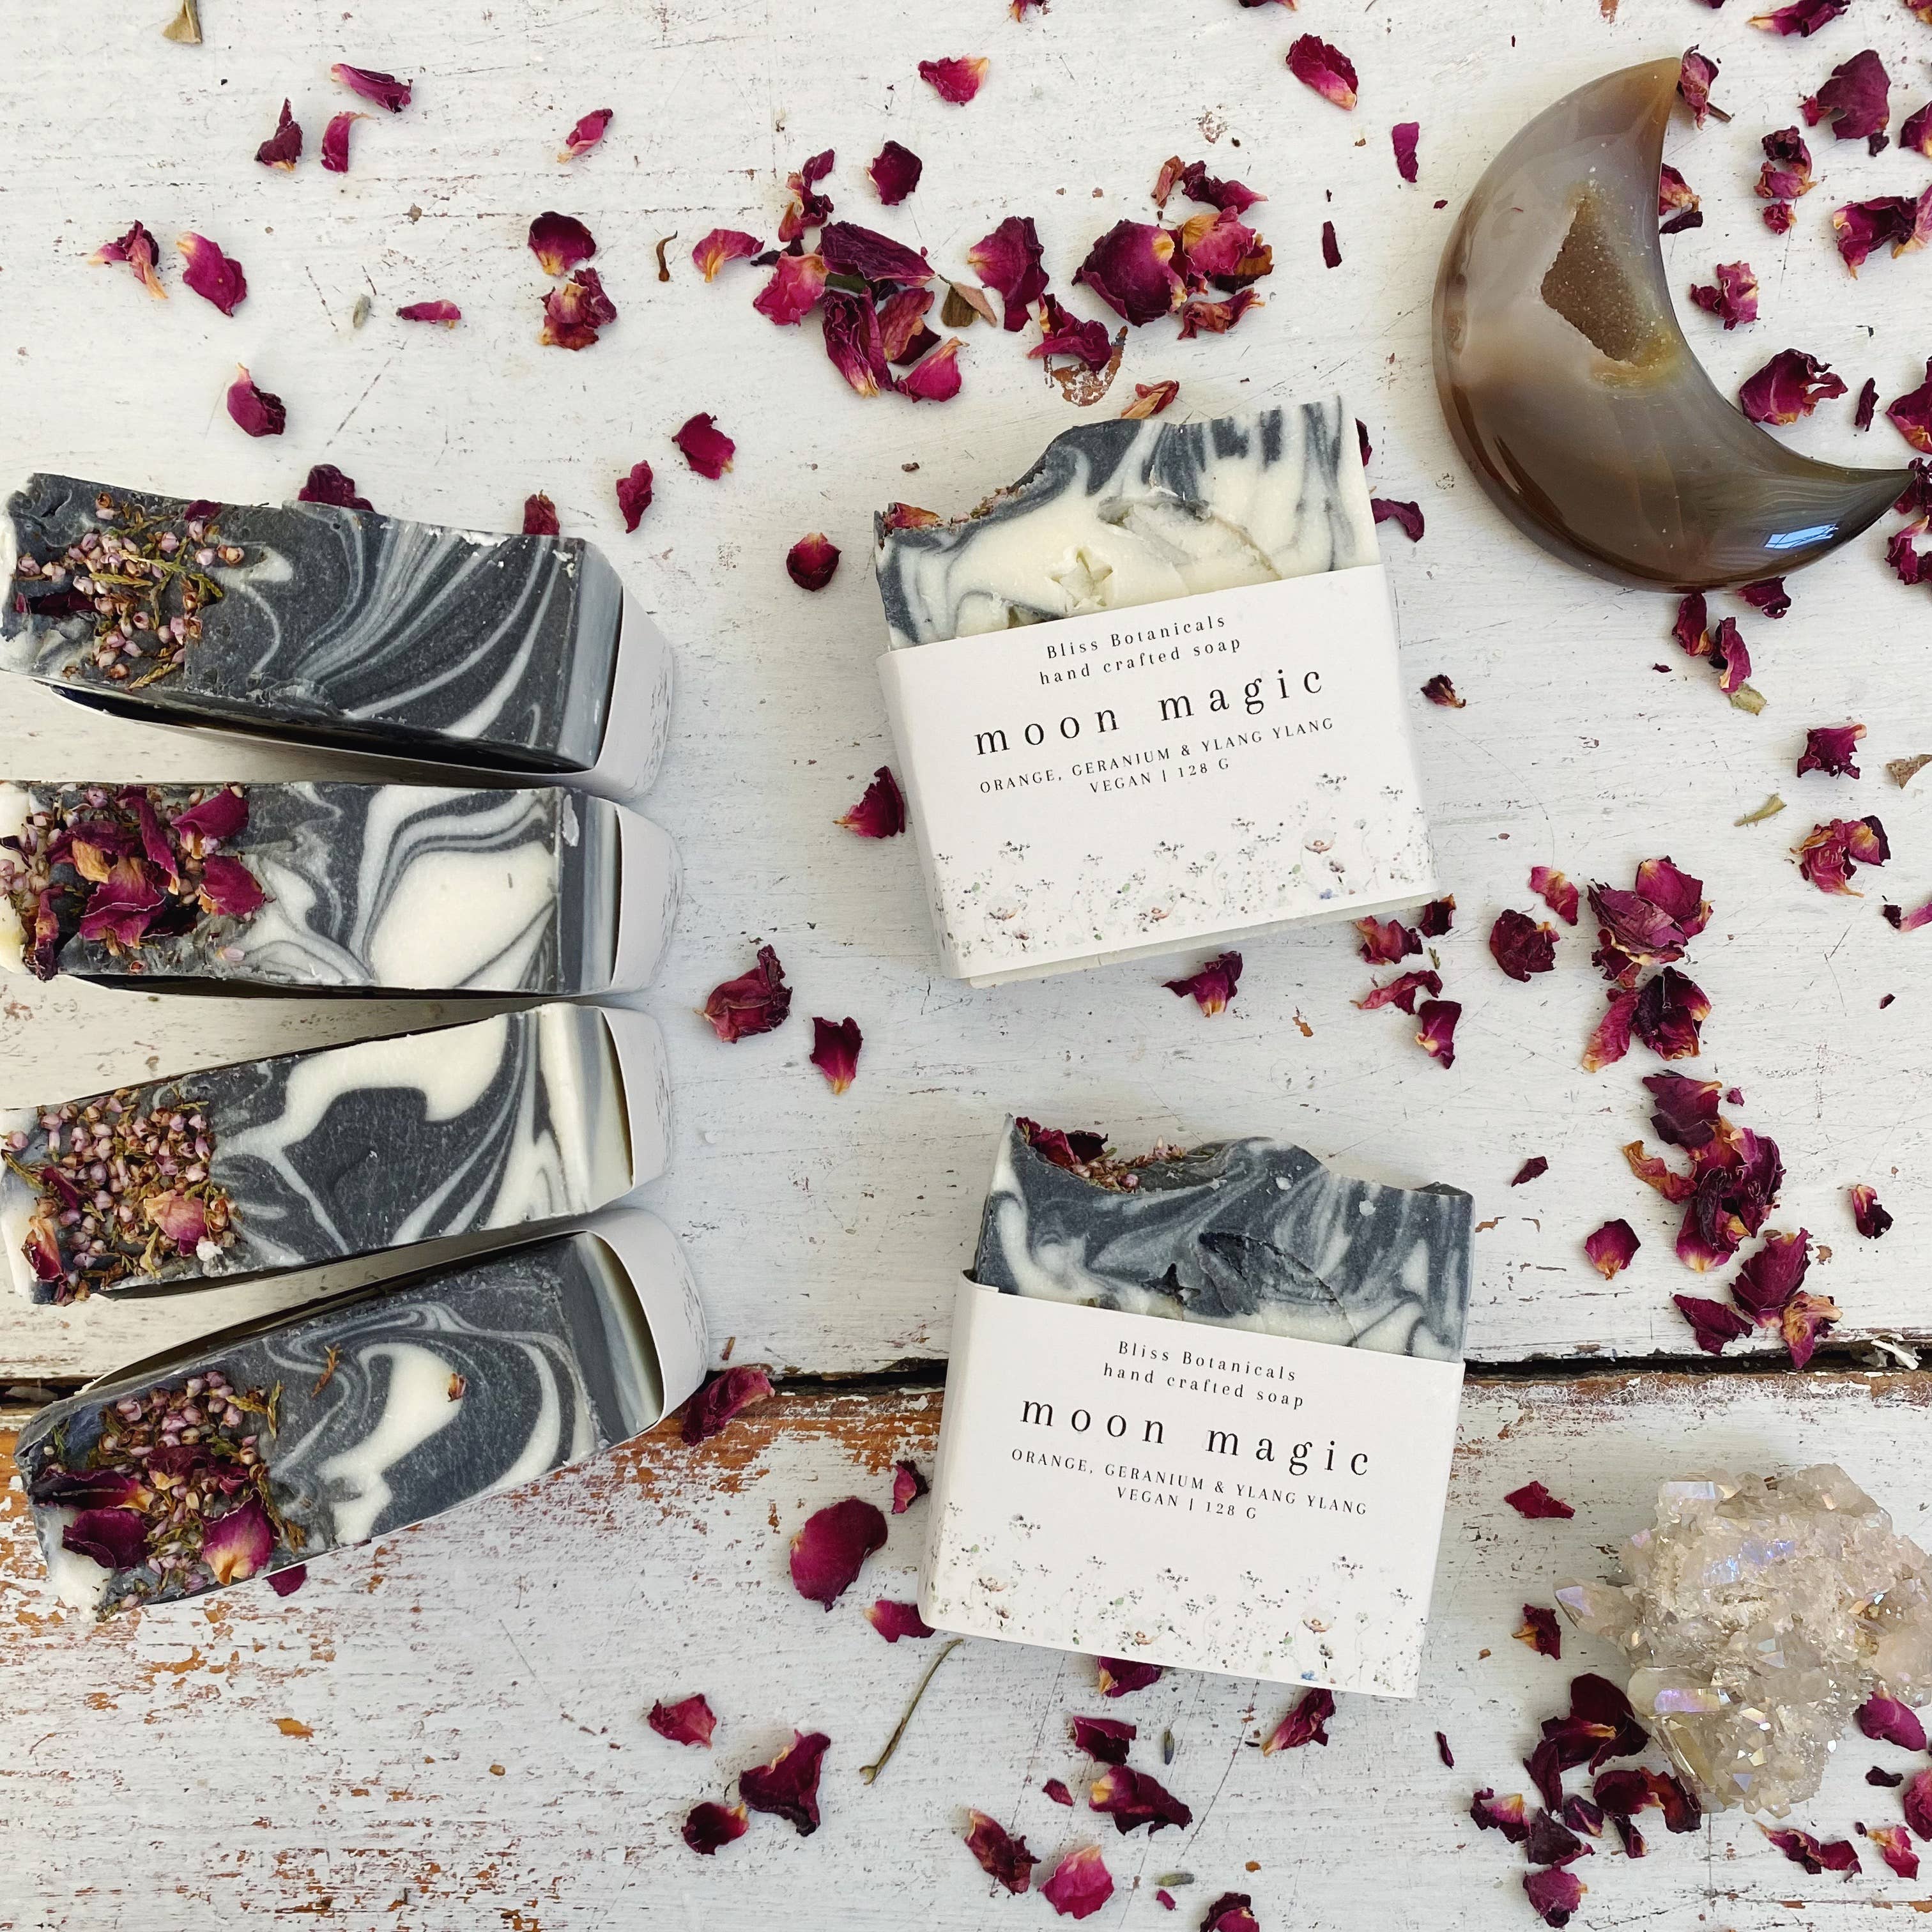 Moon Magic Soap bars with marbled patterns alongside dried rose petals, crystals, and a crescent moon dish on a rustic white wooden surface, infused with wild nurturer aromatherapy essential oils. Created by Bliss Botanicals.